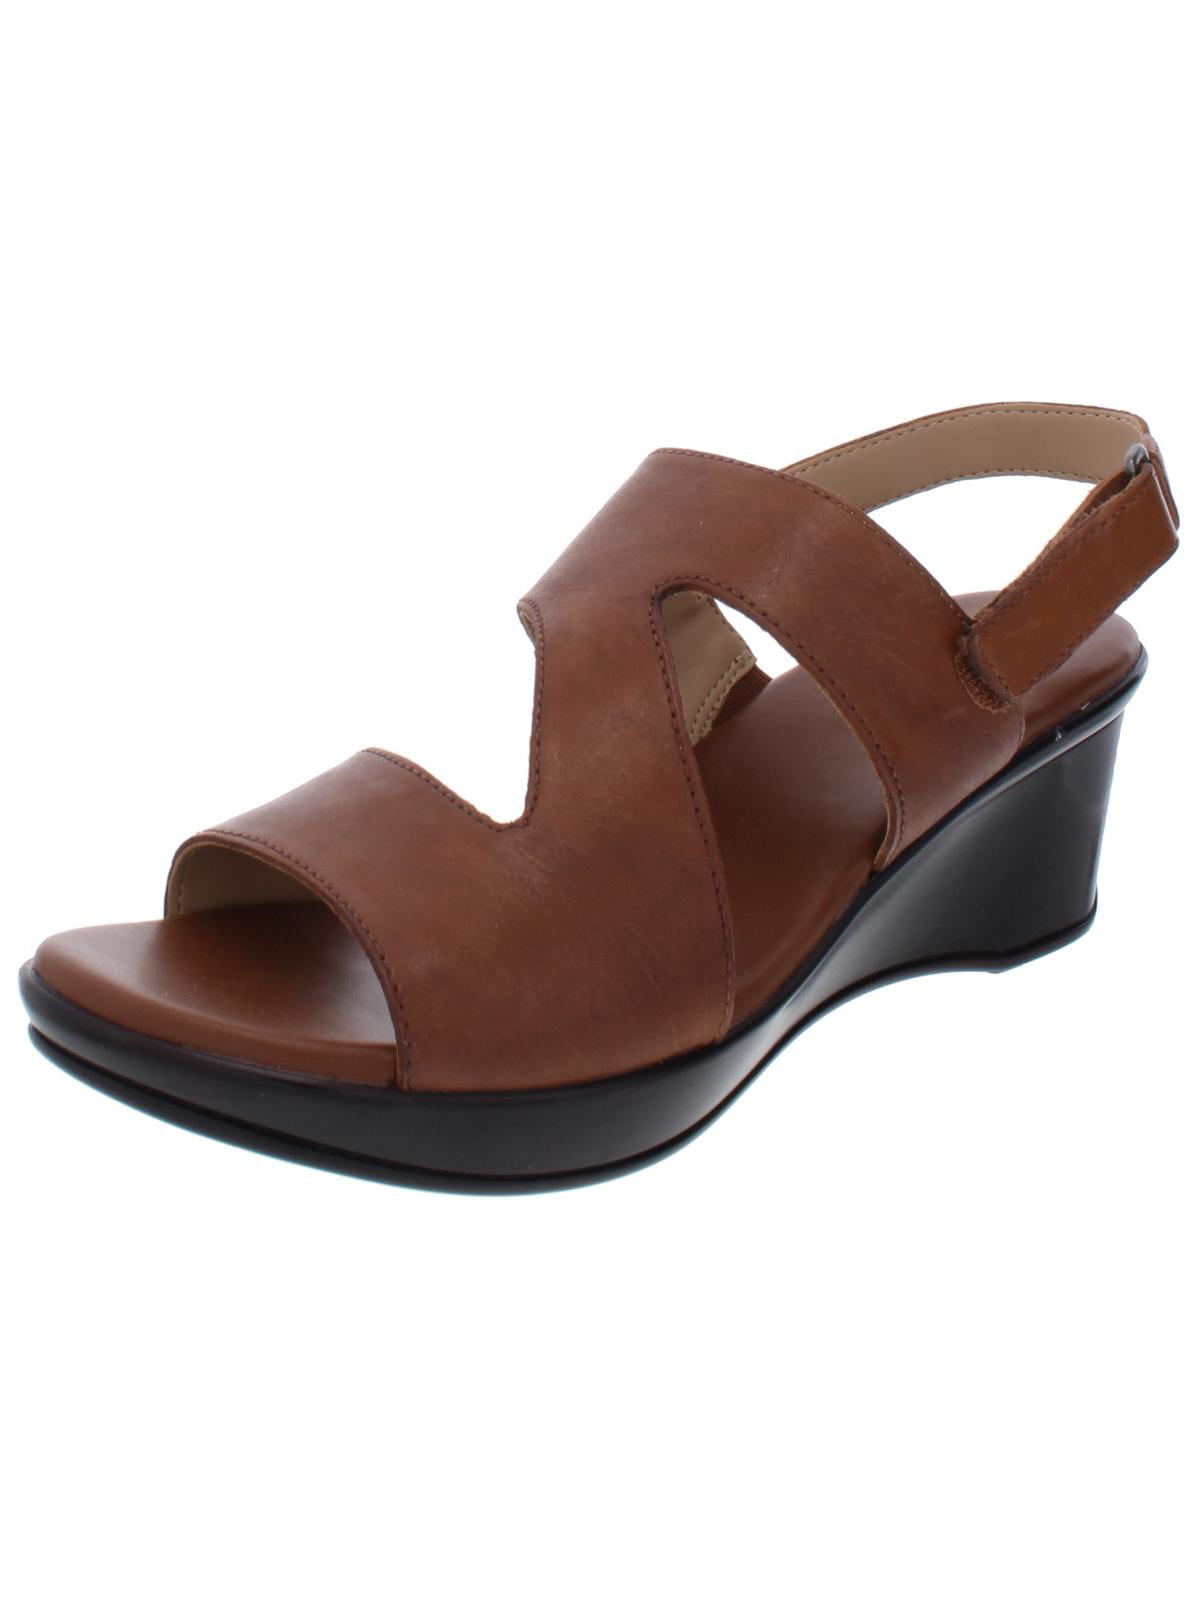 Naturalizer Womens Valerie Leather Slingback Wedge Sandals